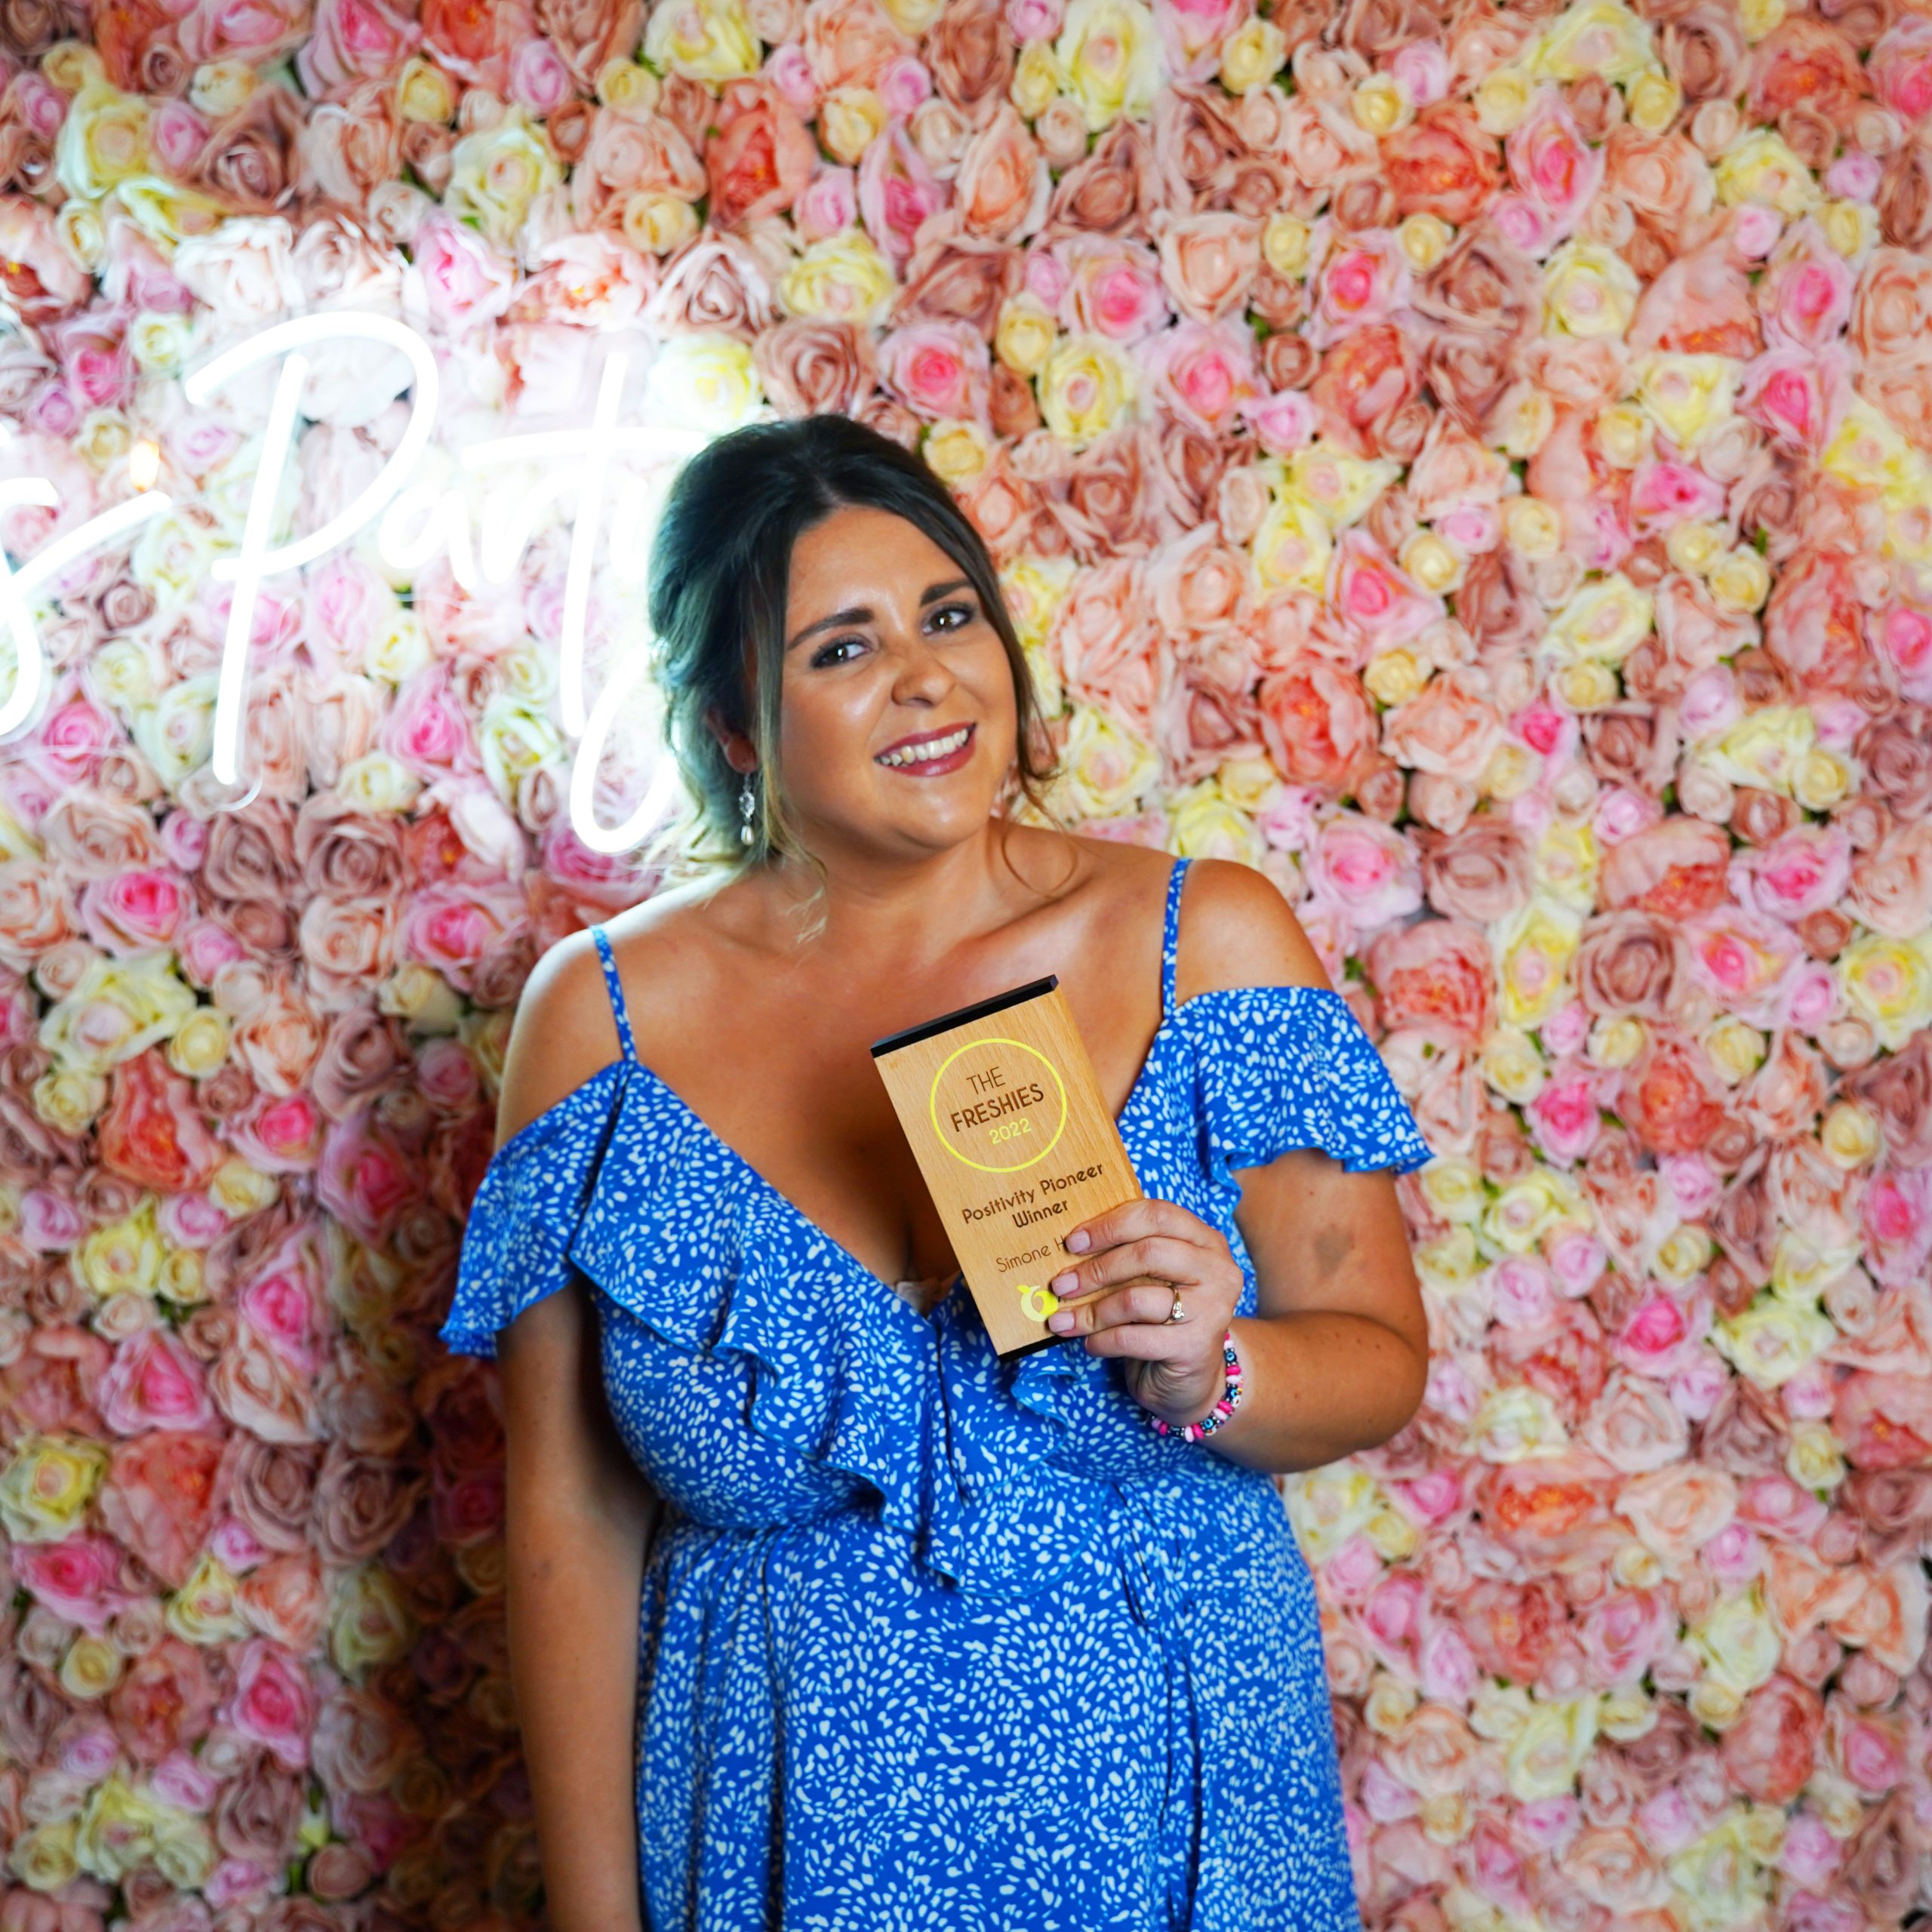 The Positivity Pioneer winner of 2022 - Simone Howarth, stood in front of a pink flower wall with two pink heart balloons and neon lighting in the back.